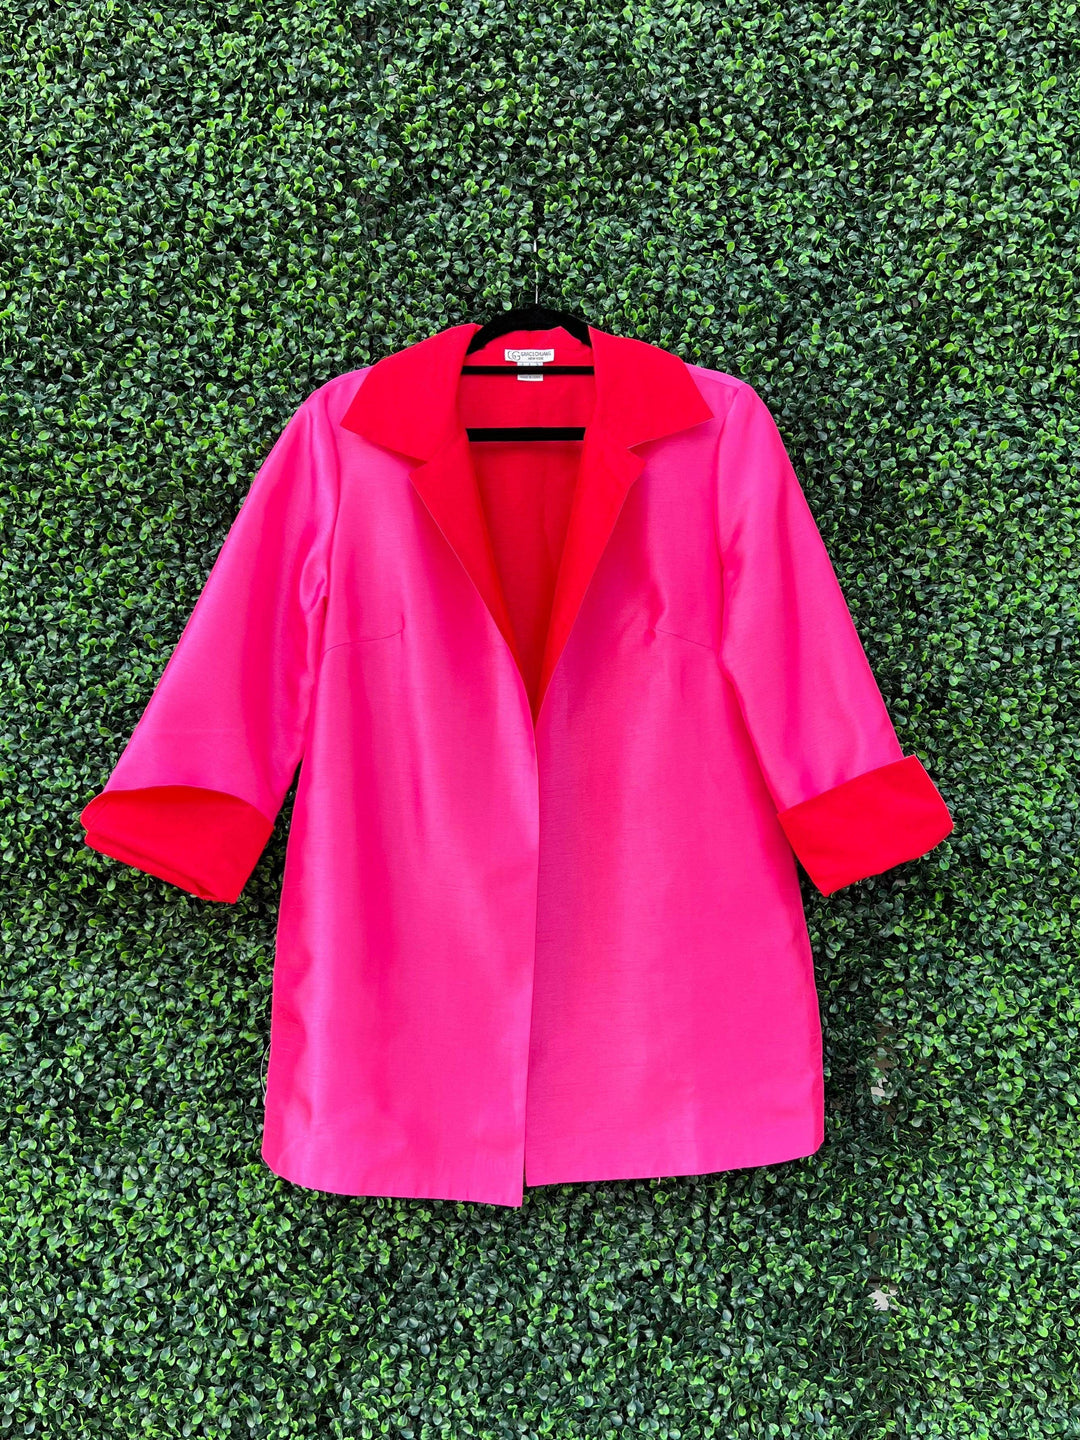 Houston boutiques dresses red and pink dressy blazer